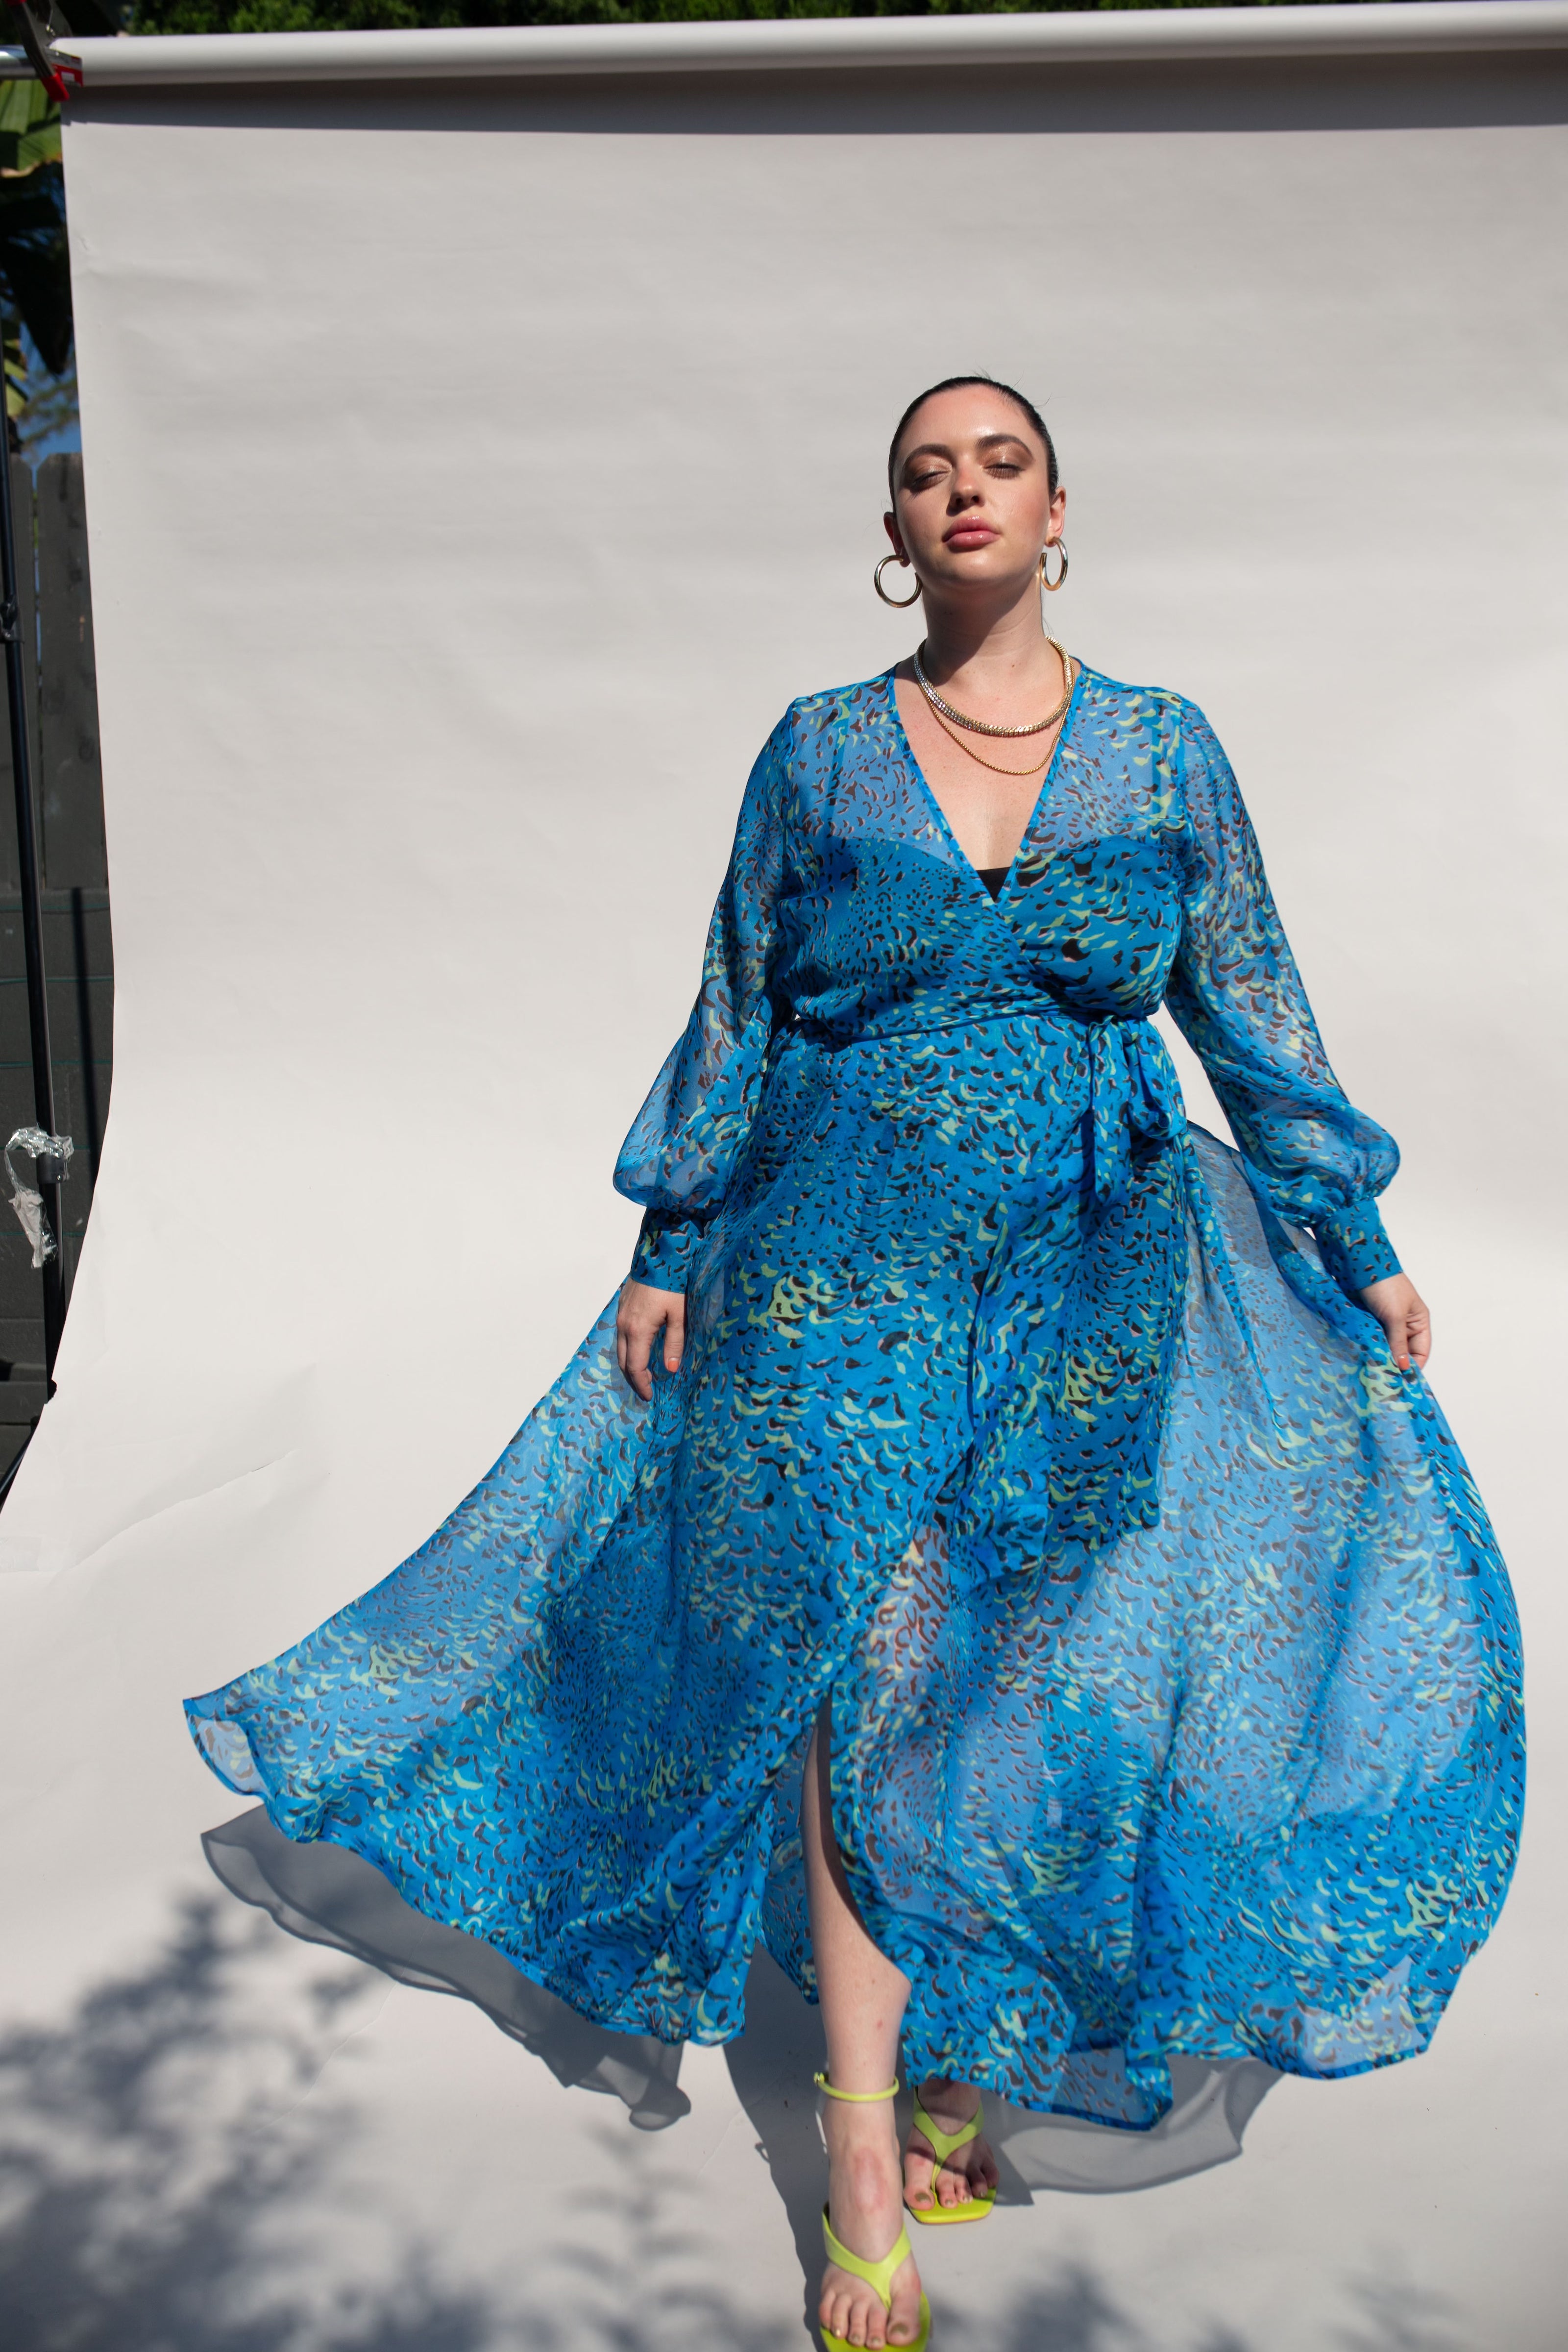 Our best-selling, now classic, maxi wrap dress! The luxurious blue silk chiffon gives this dress a very unique, flowy look. Wear with our navy slip dress or on its own for a sheerly fantastic look. Designed to fit the "True Size Majority" sizes 10-22+